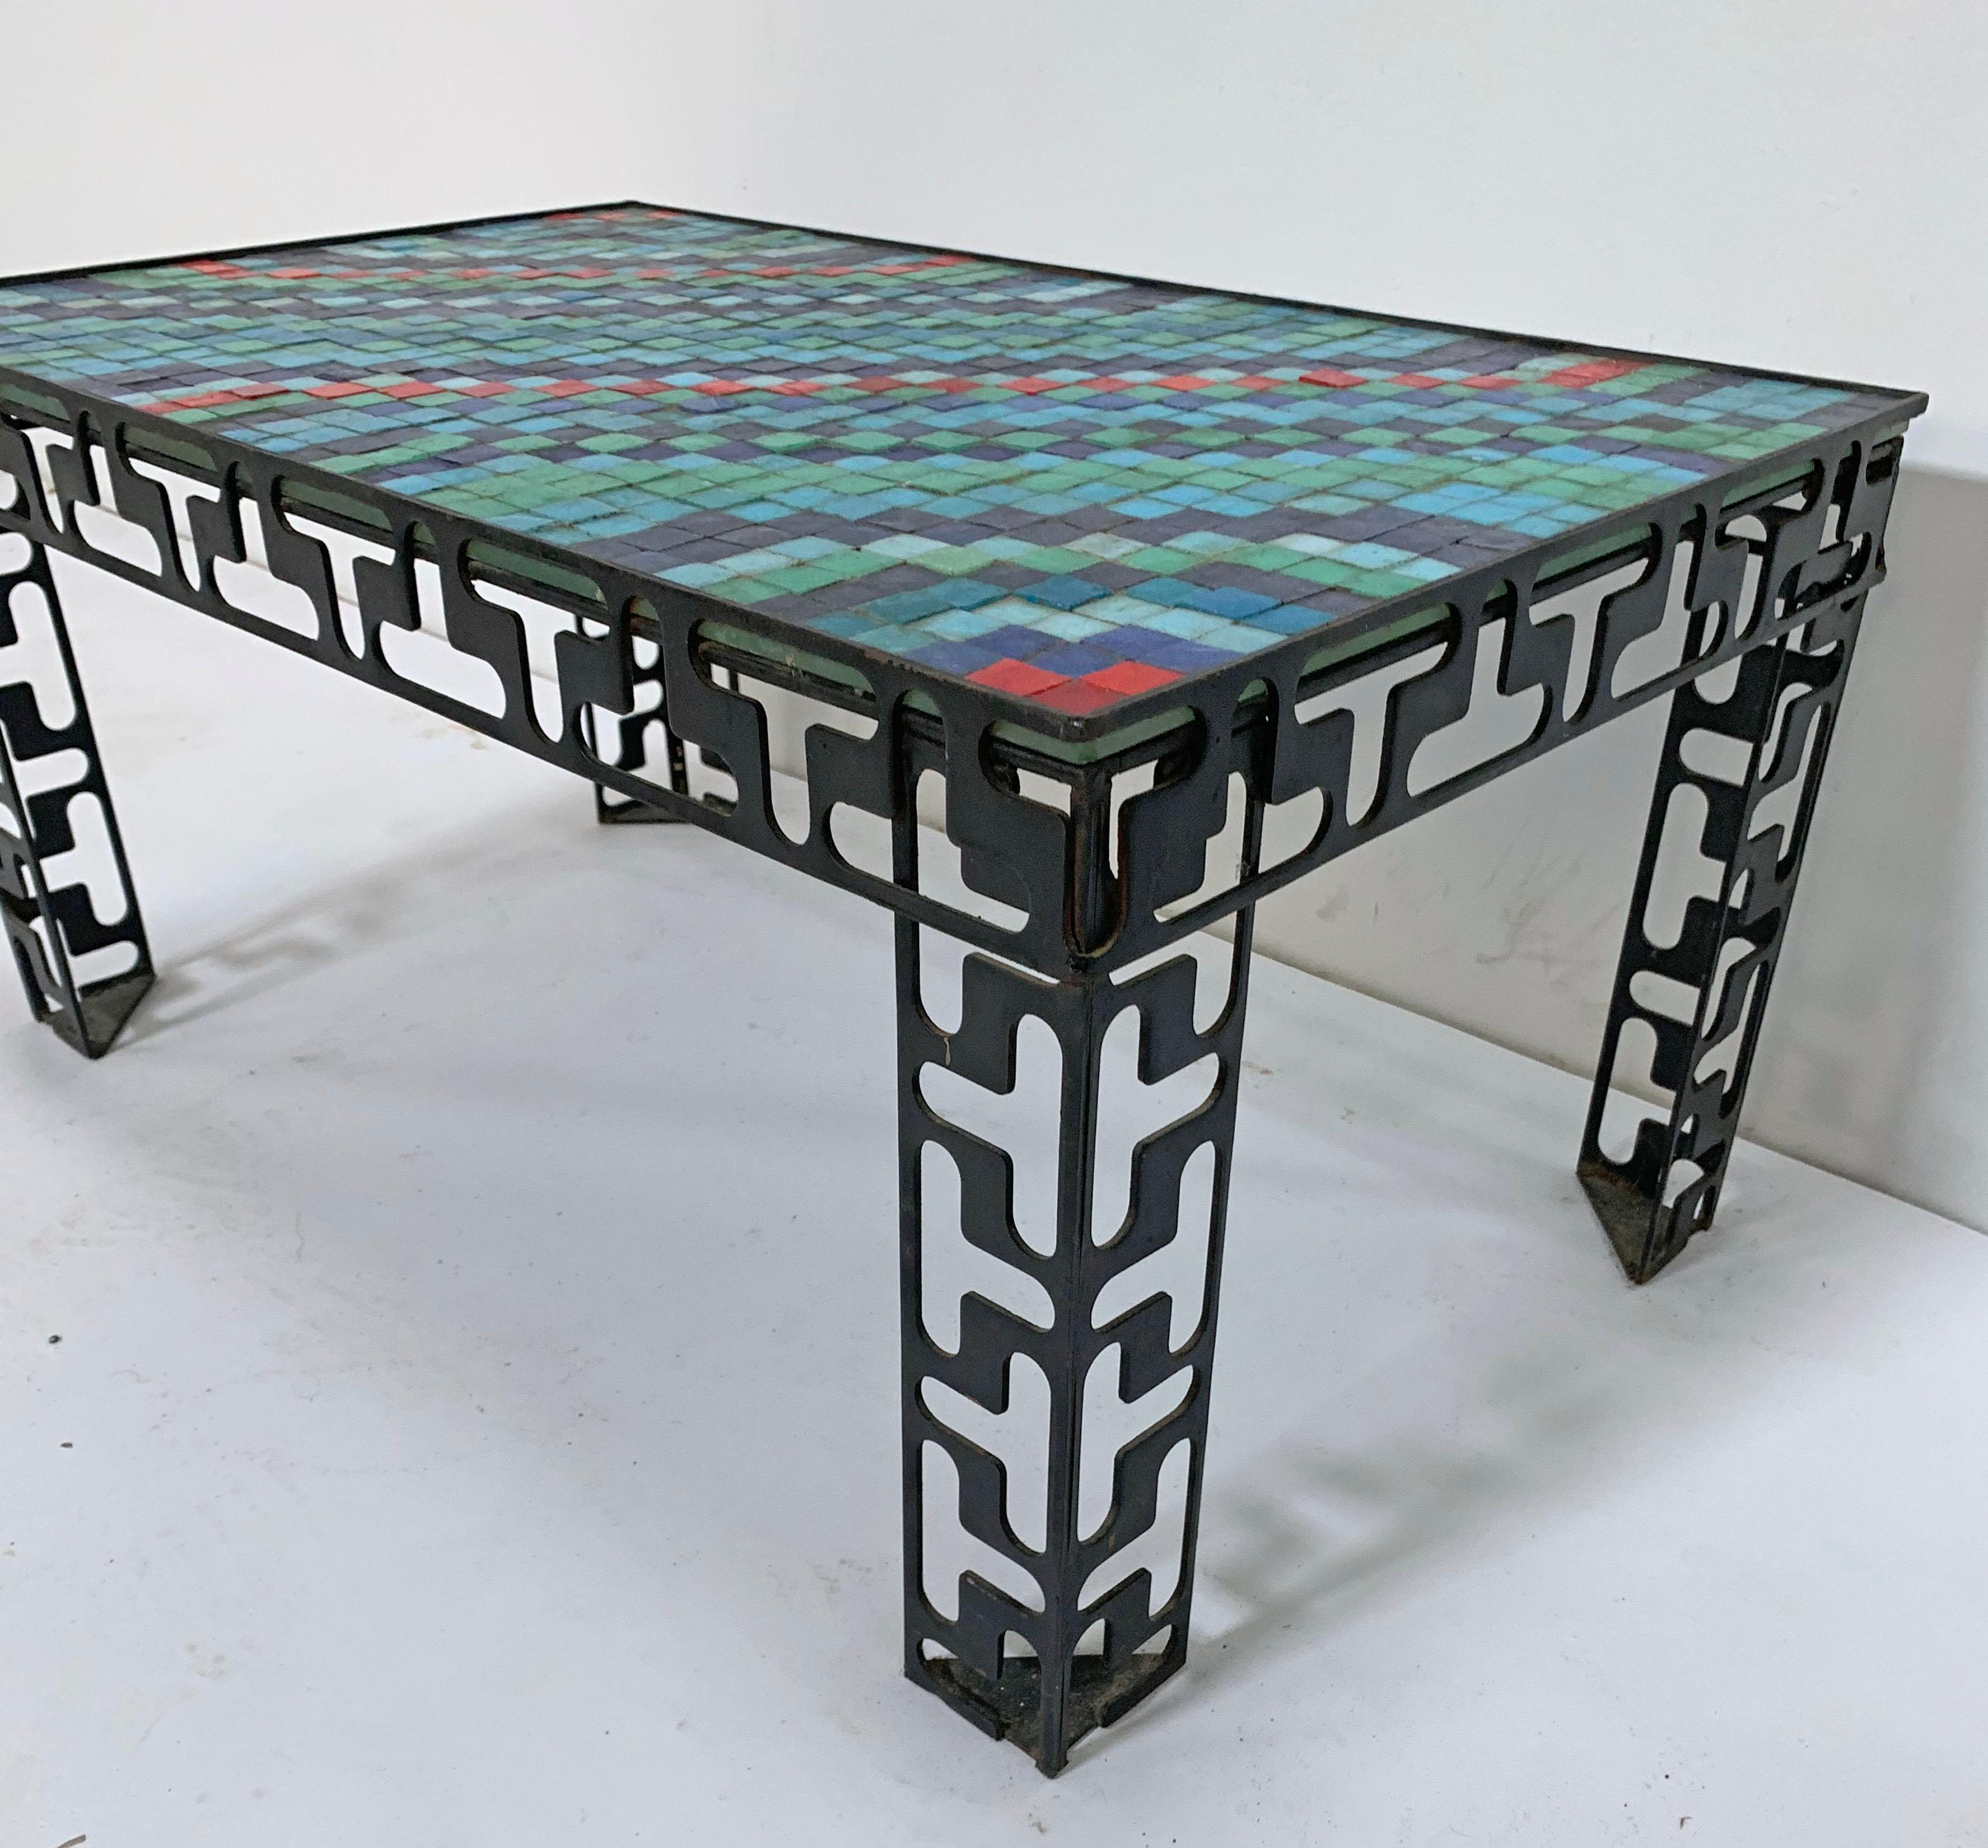 Late 20th Century Artist Made Murano Glass Tile Mosaic Coffee Table, circa 1970s For Sale